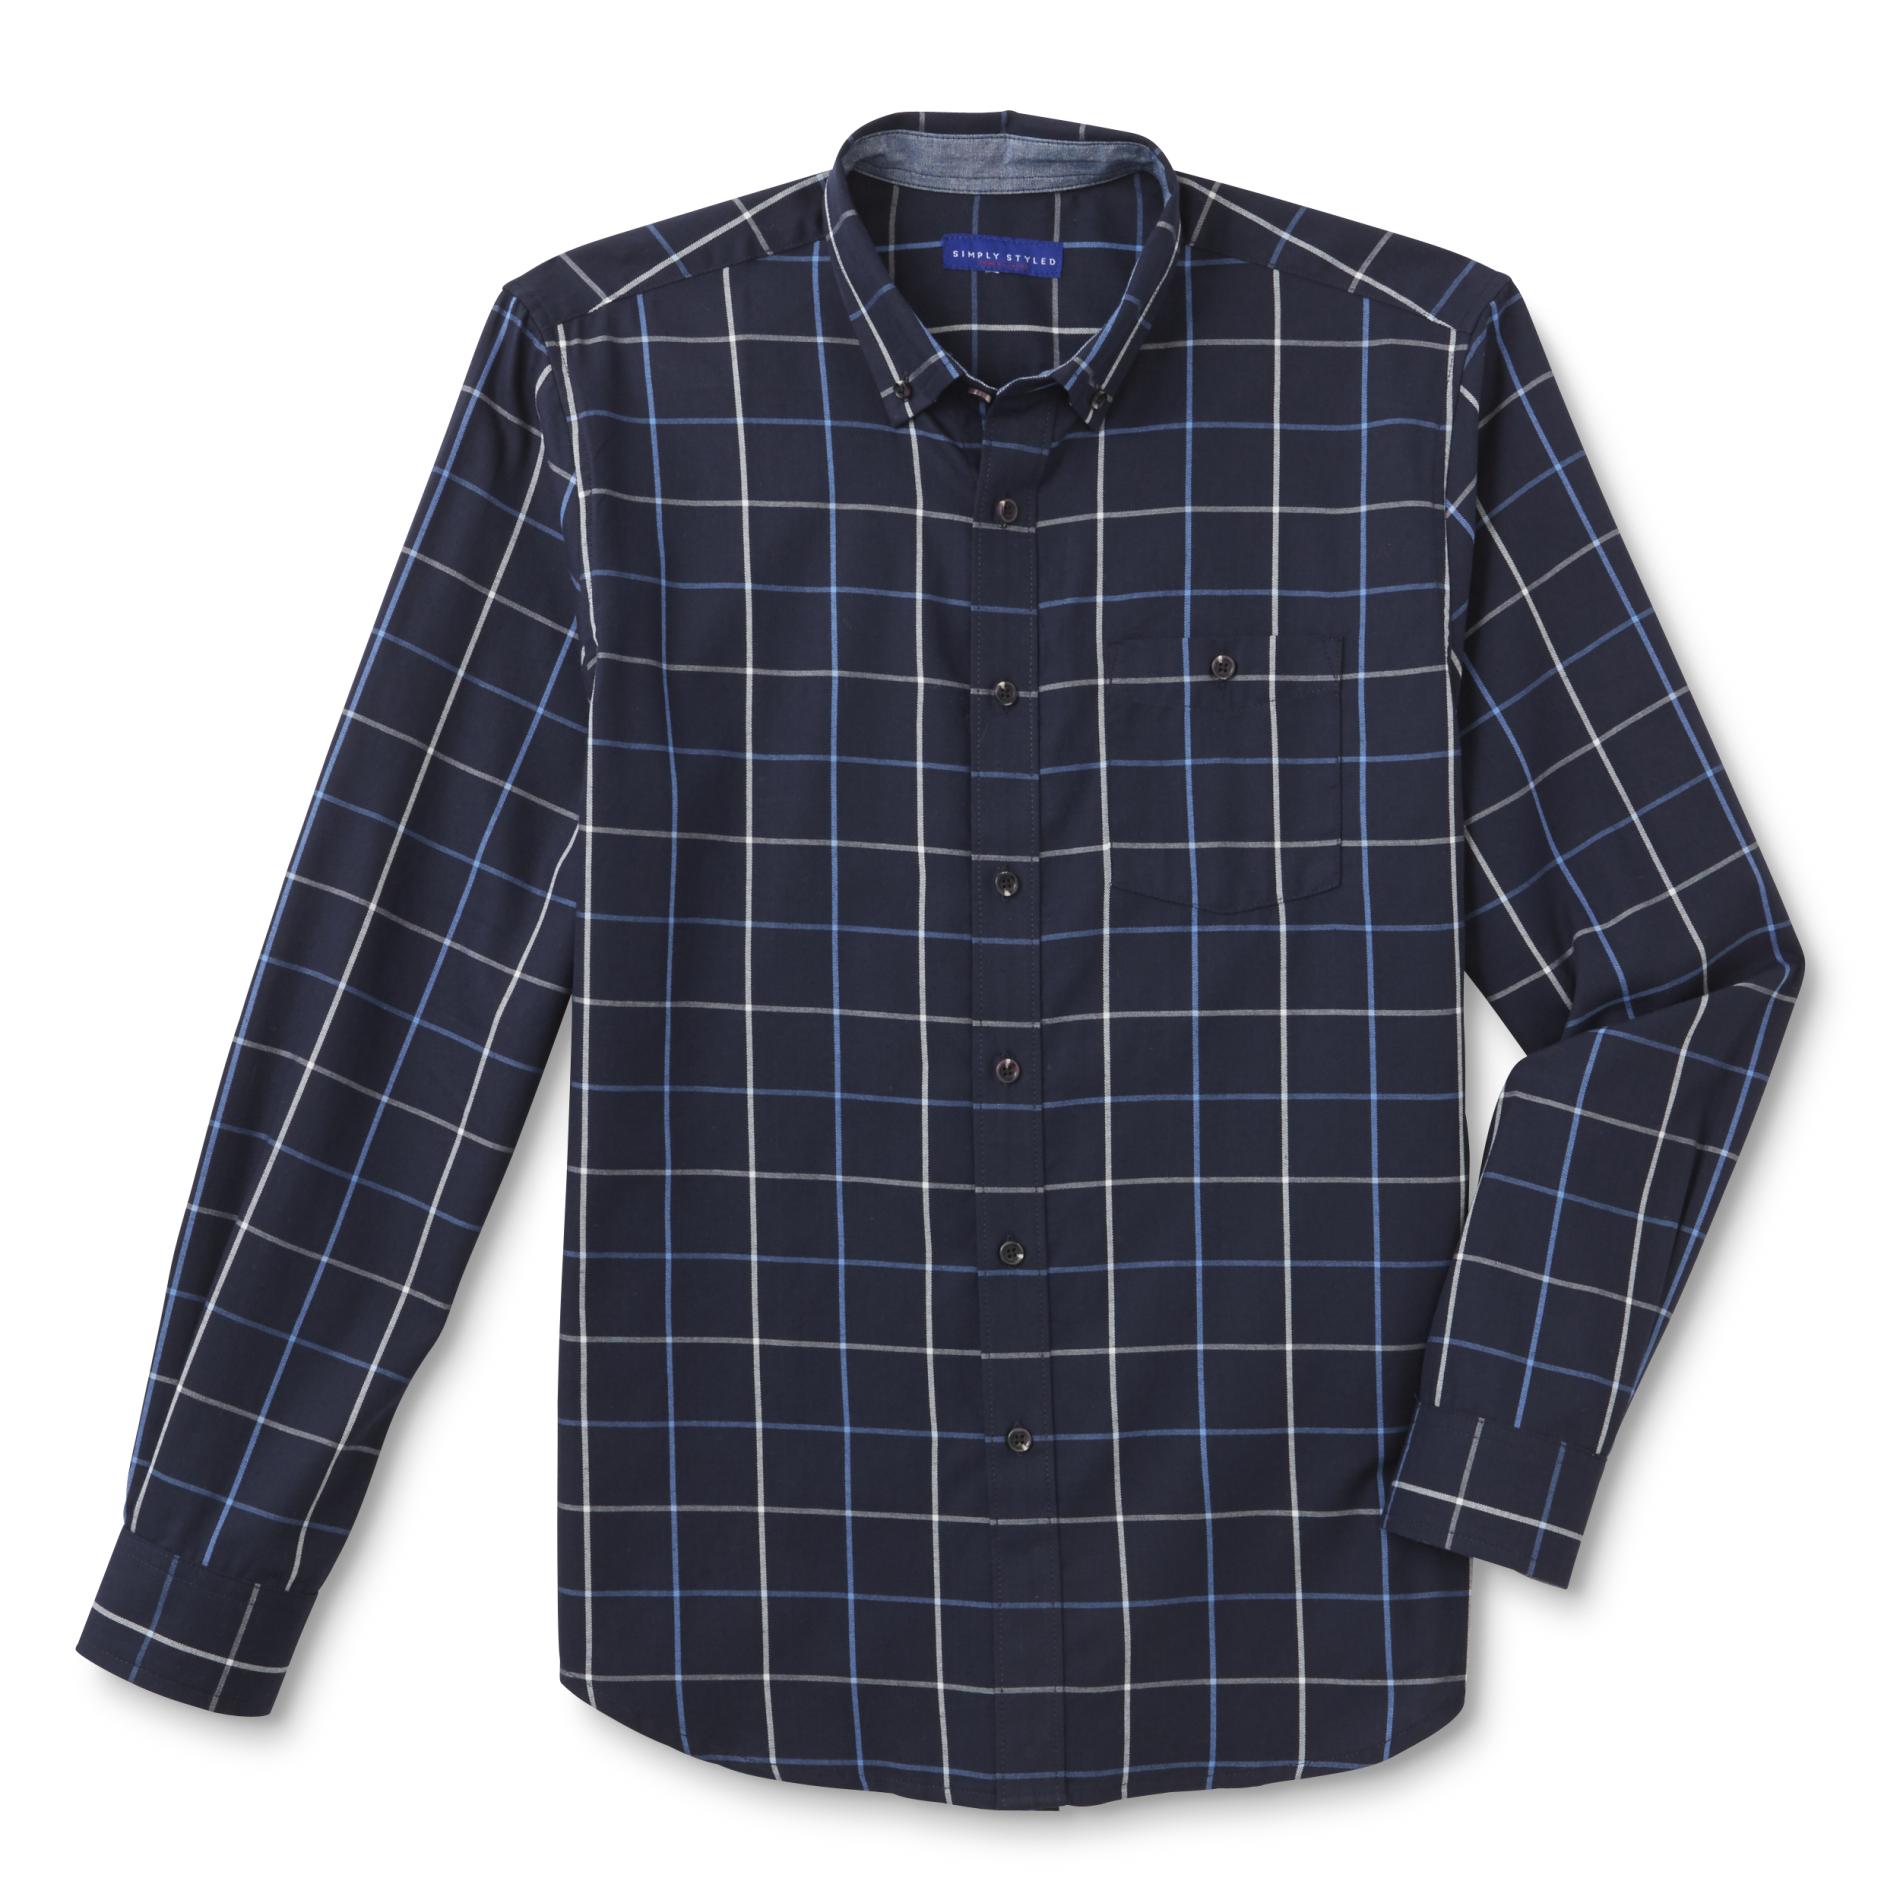 Simply Styled Men's Sport Shirt - Checkered